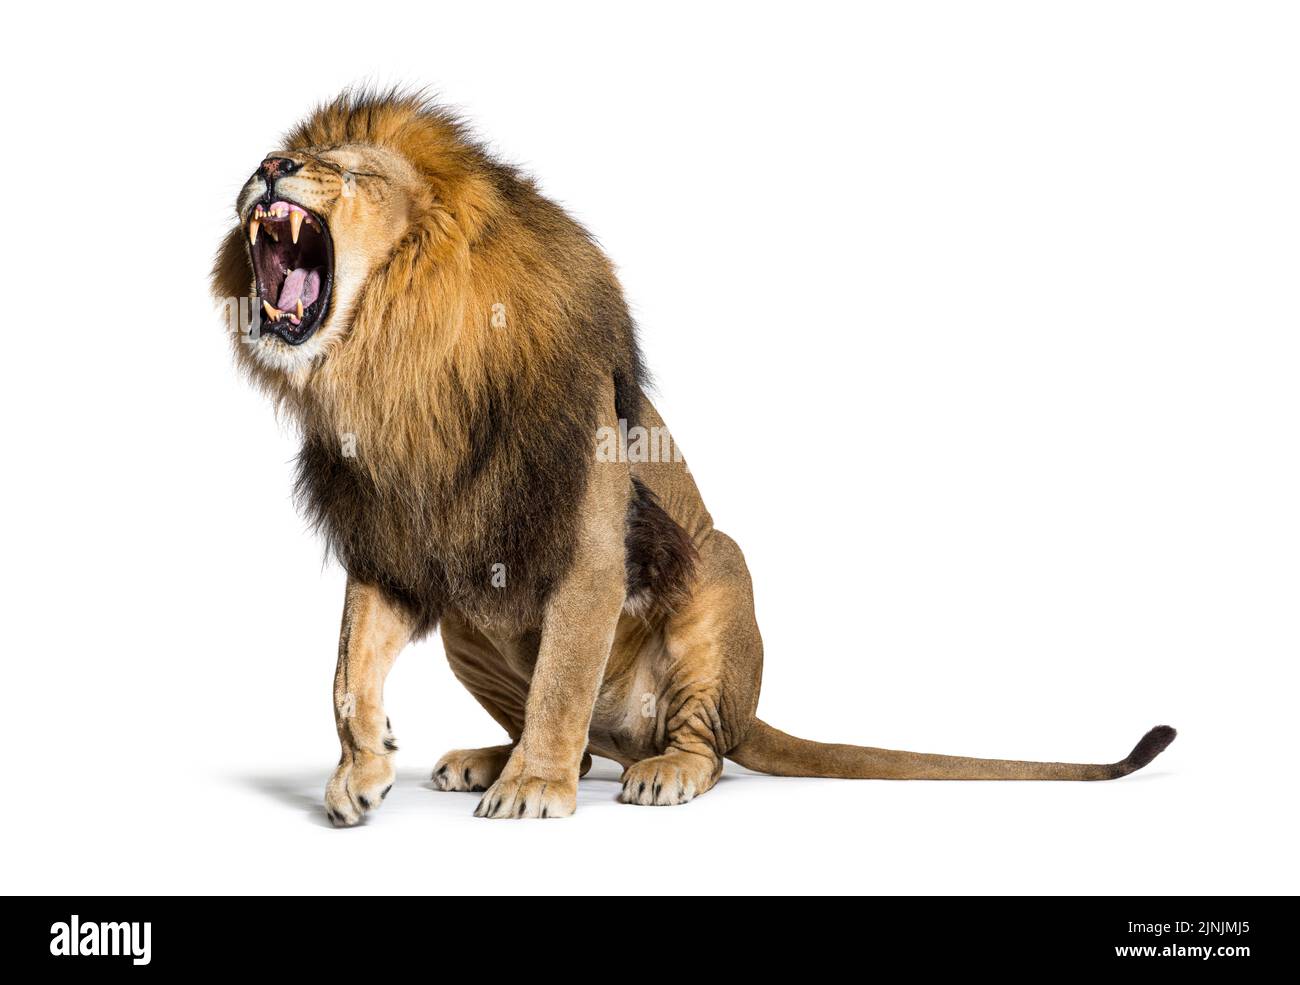 Sitting Lion, roaring and showing his teeth aggressively, Panthera leo, isolated on white Stock Photo